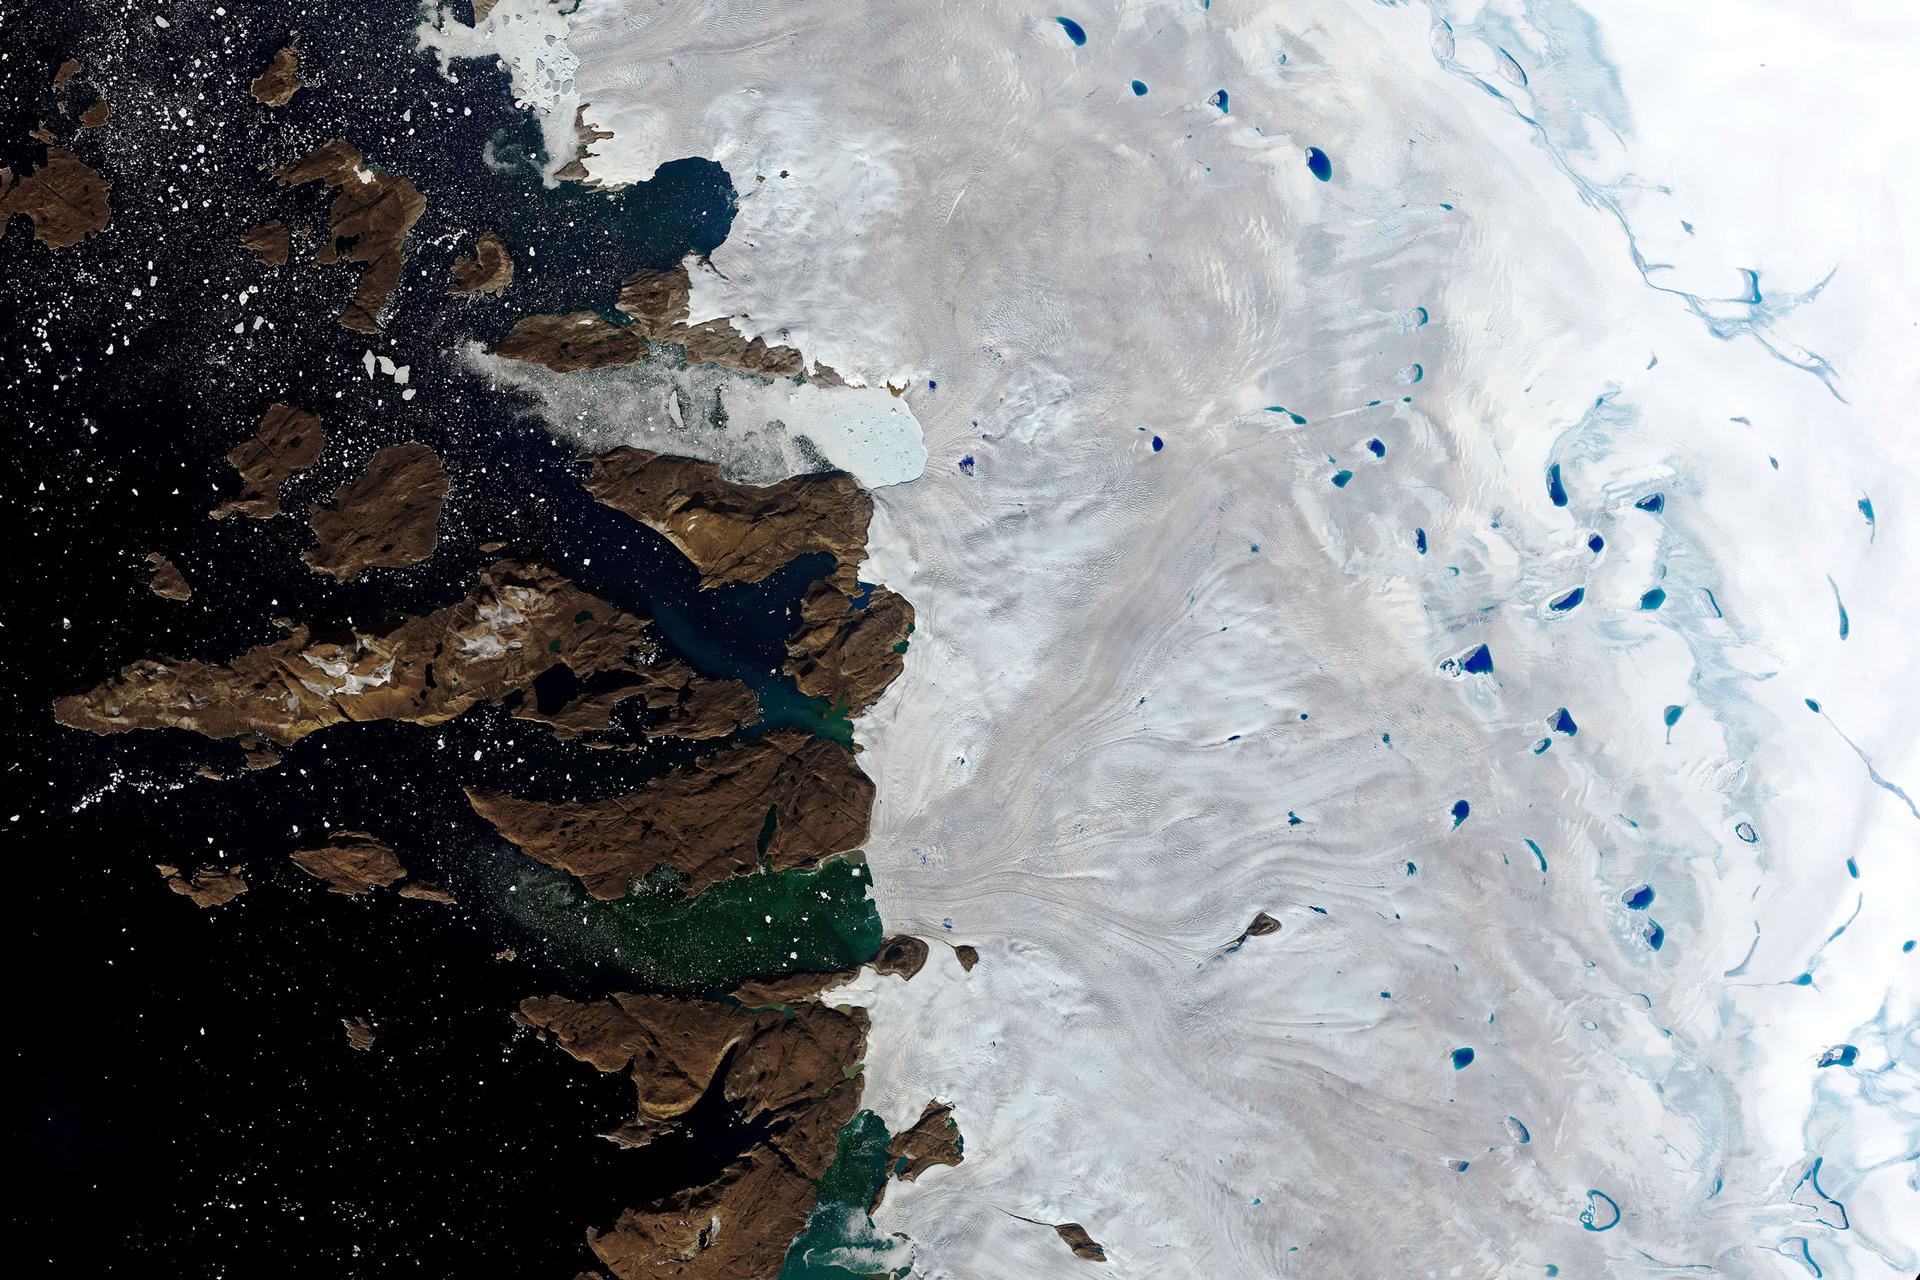 This Monday, July 30, 2019 natural-color image made with the Operational Land Imager (OLI) on the Landsat 8 satellite shows meltwater collecting on the surface of the ice sheet in northwest Greenland near the sheet's edge.